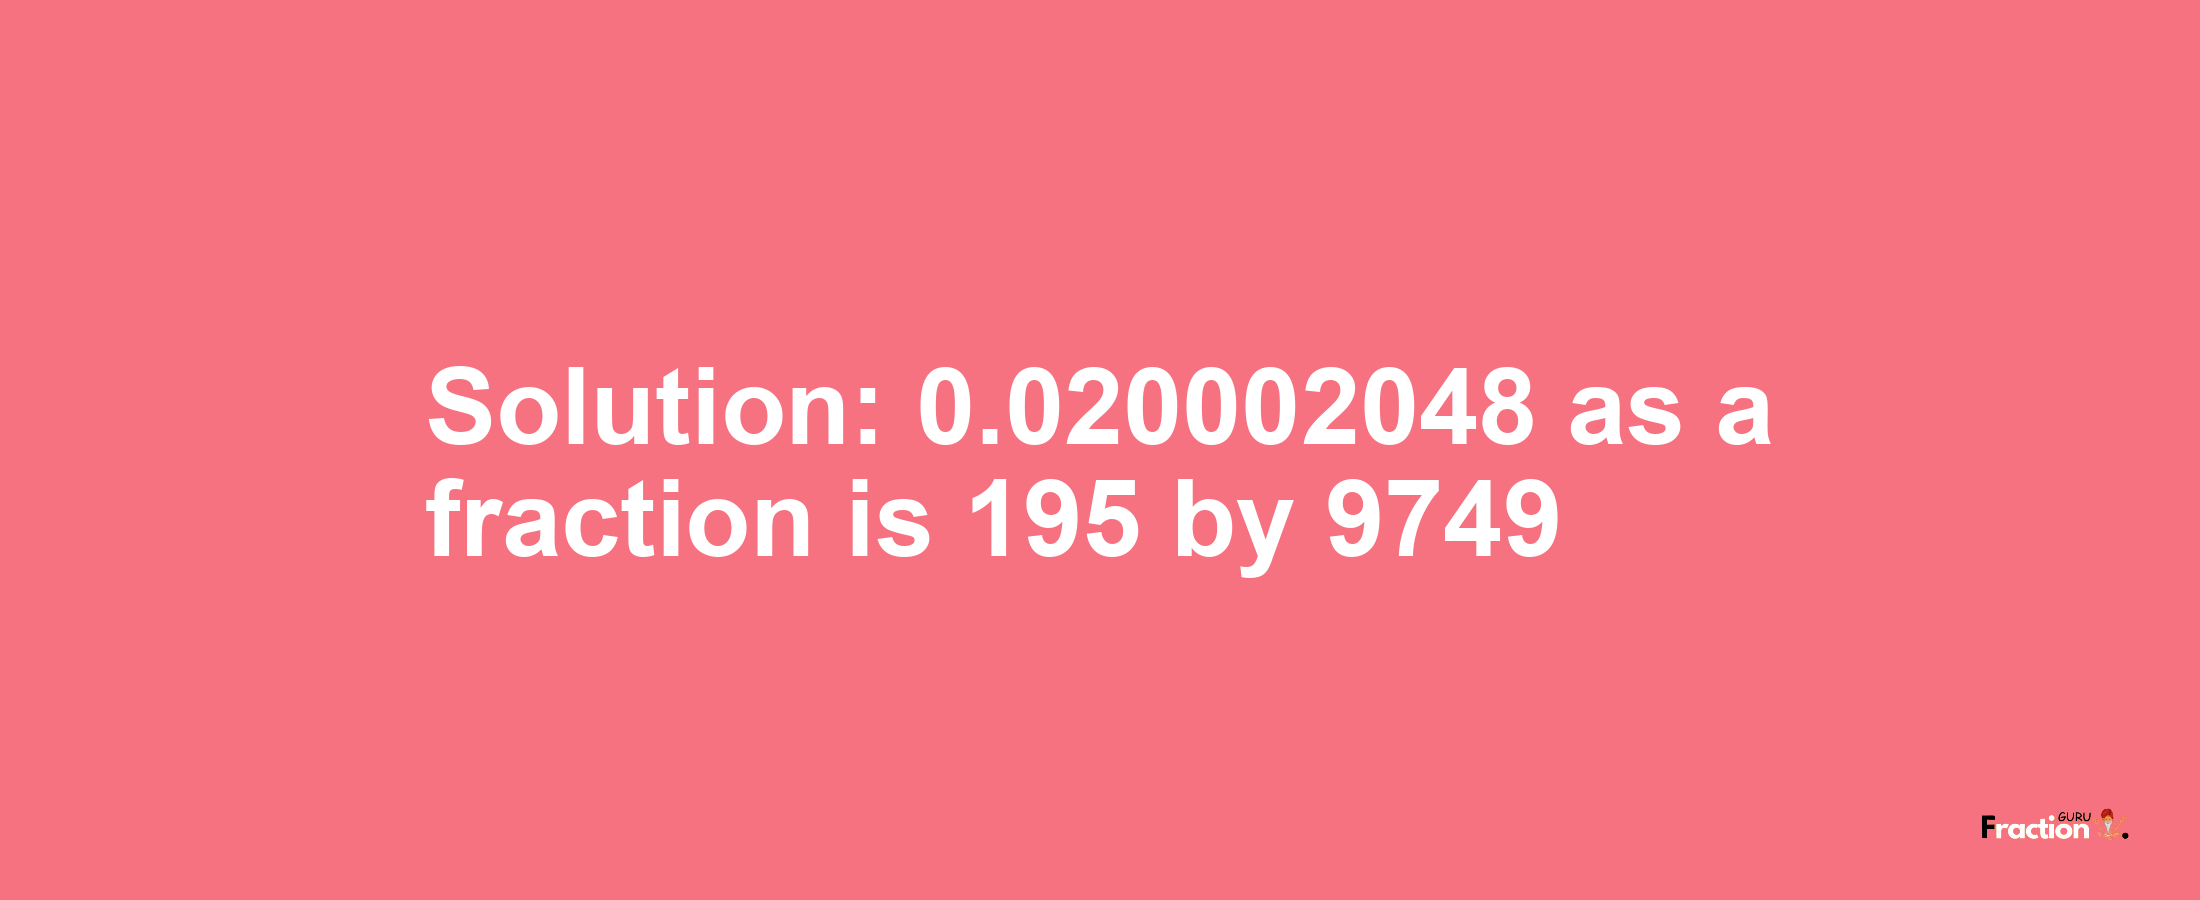 Solution:0.020002048 as a fraction is 195/9749